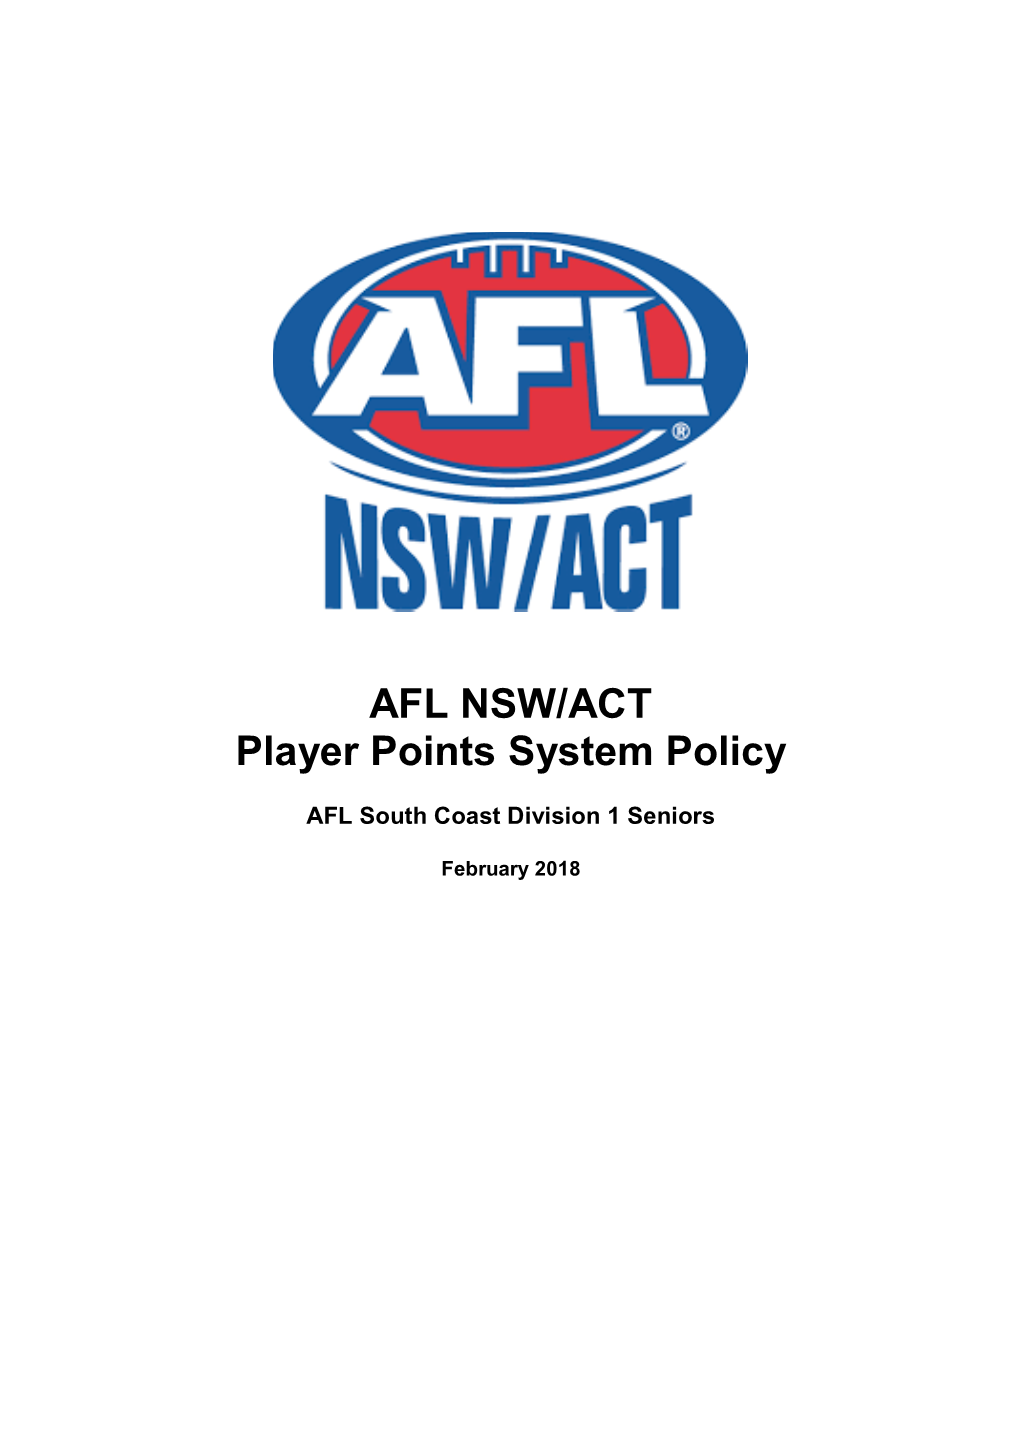 AFL NSW/ACT Player Points System Policy